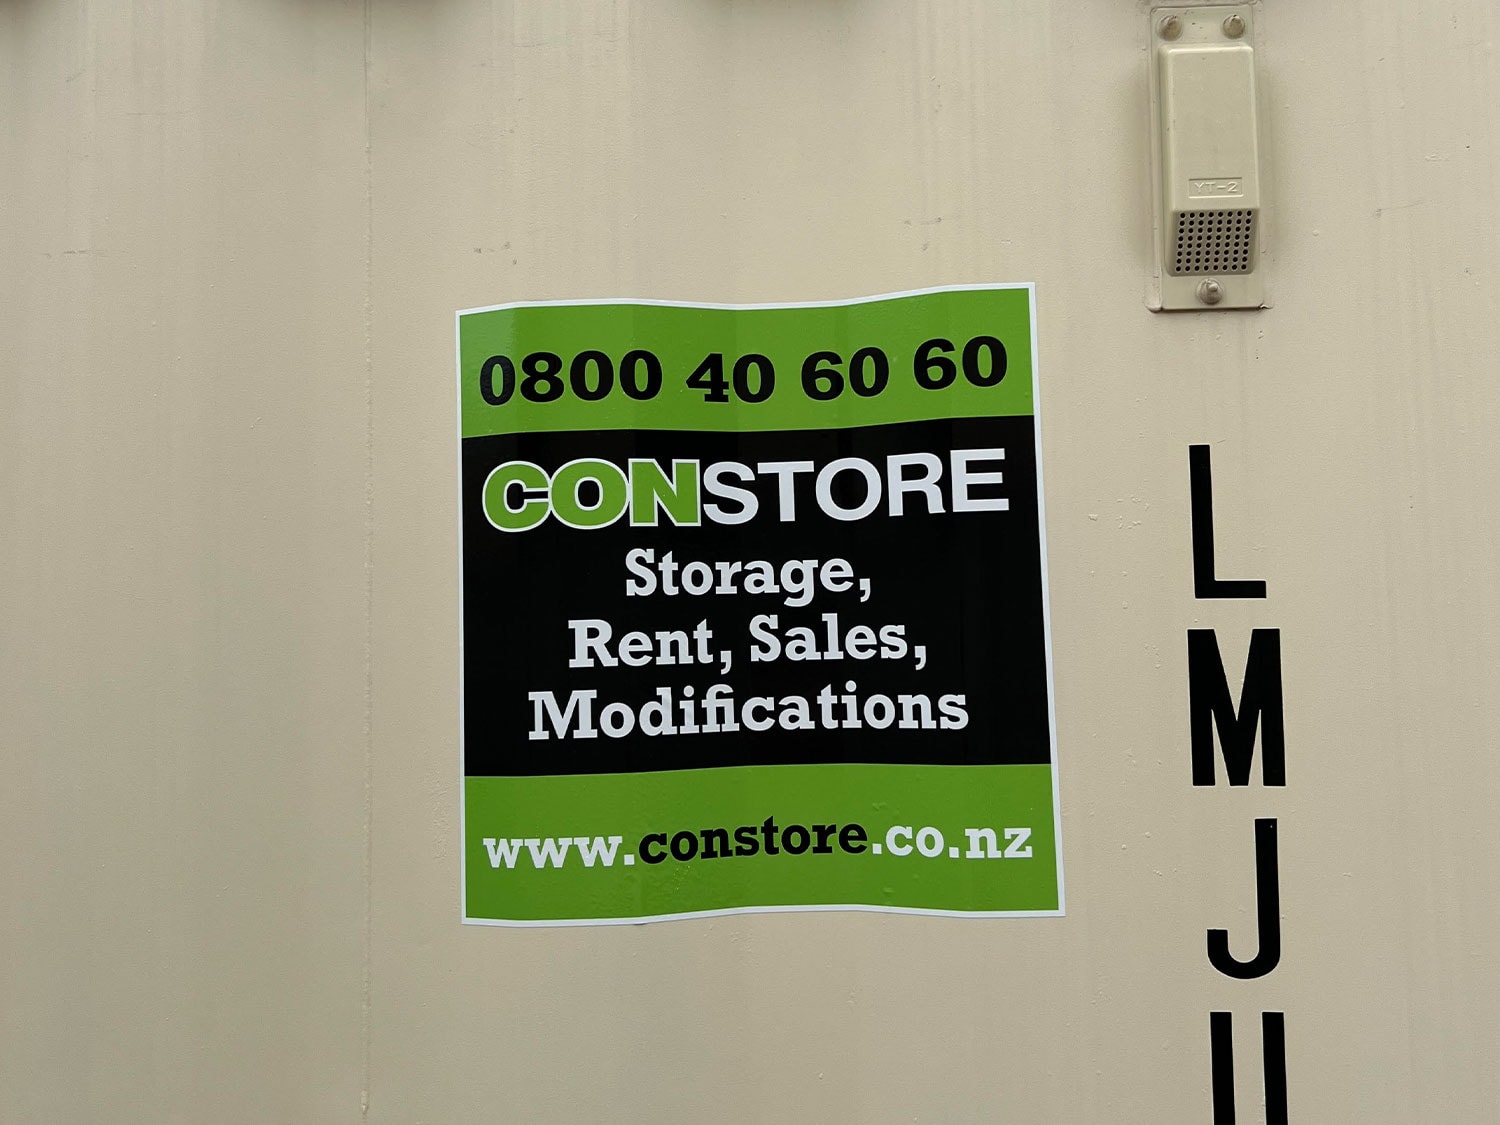 constore-auckland-new-zealand-containers-for-sale-and-rental-storage-solutions-25